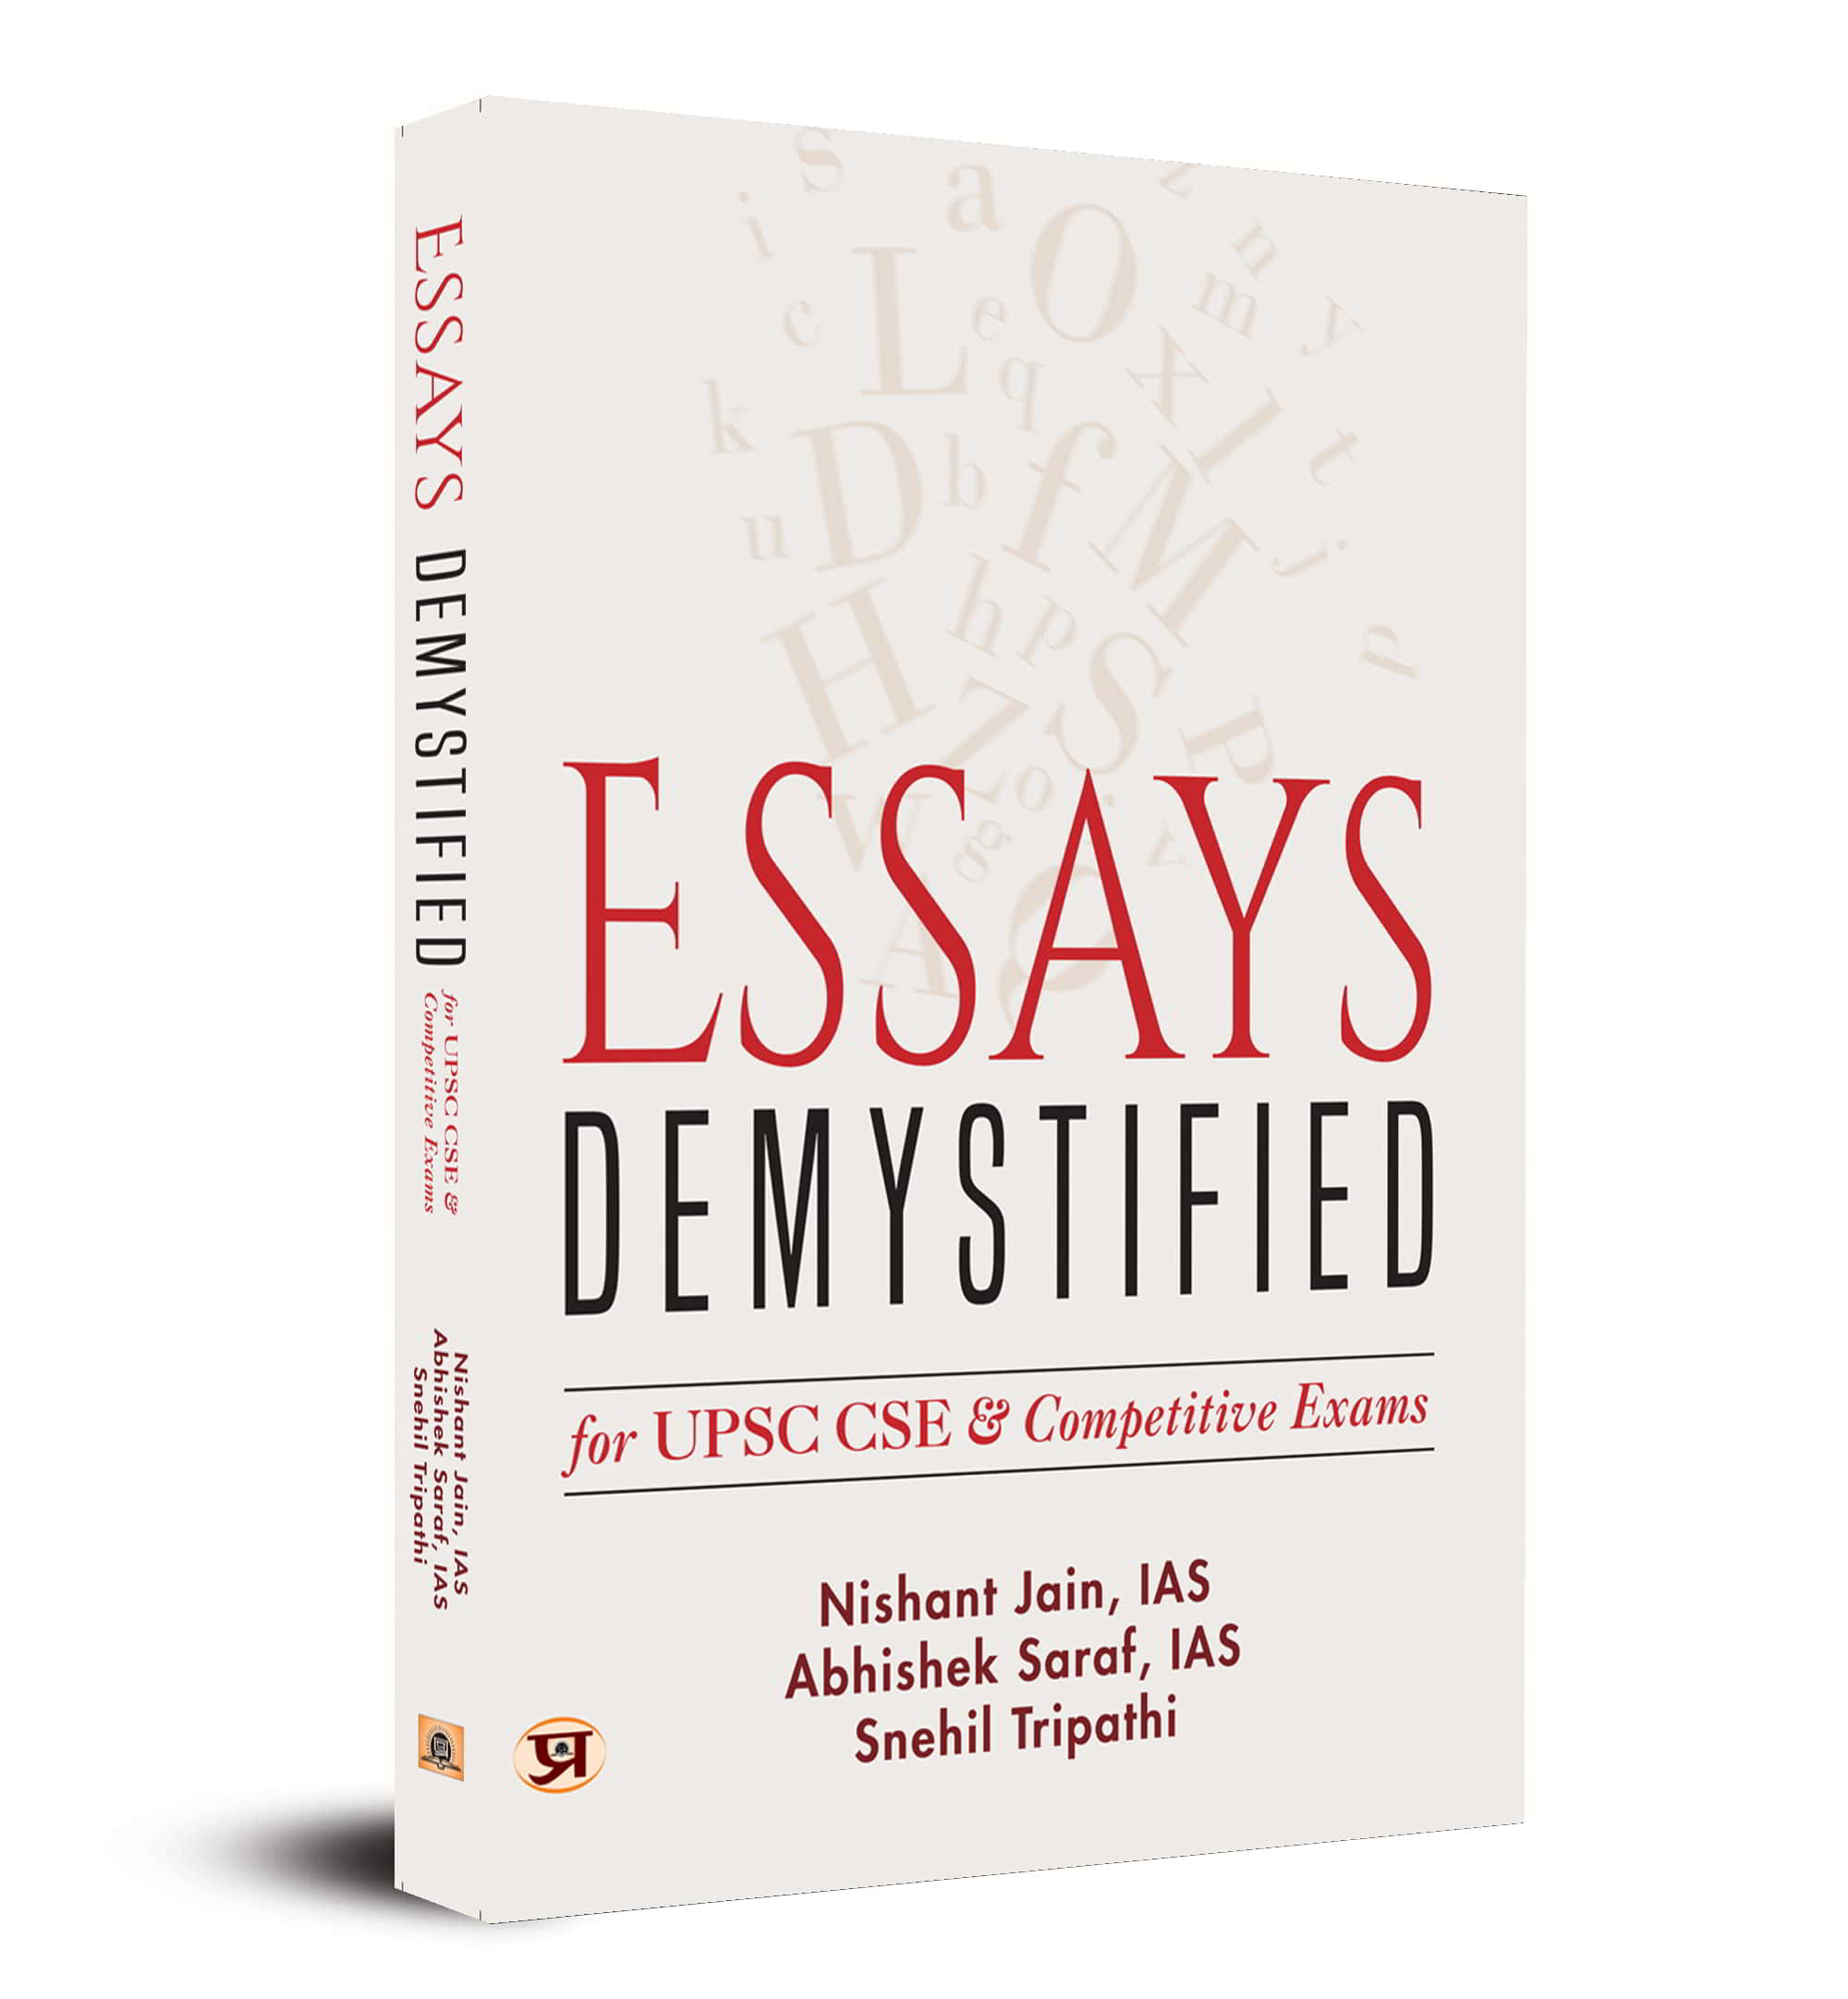 Essays Demystified For UPSC. CSE & Competitive Exams